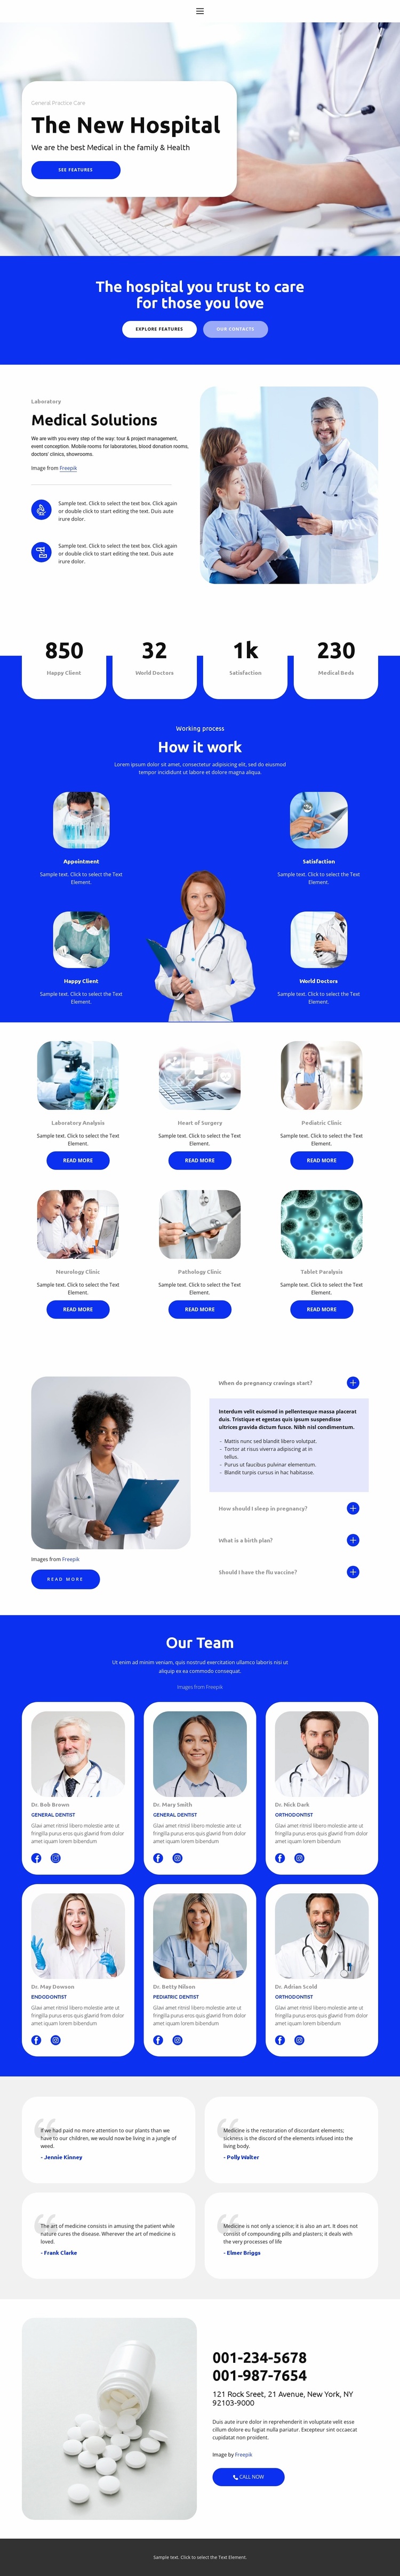 The New Hospital Website Template